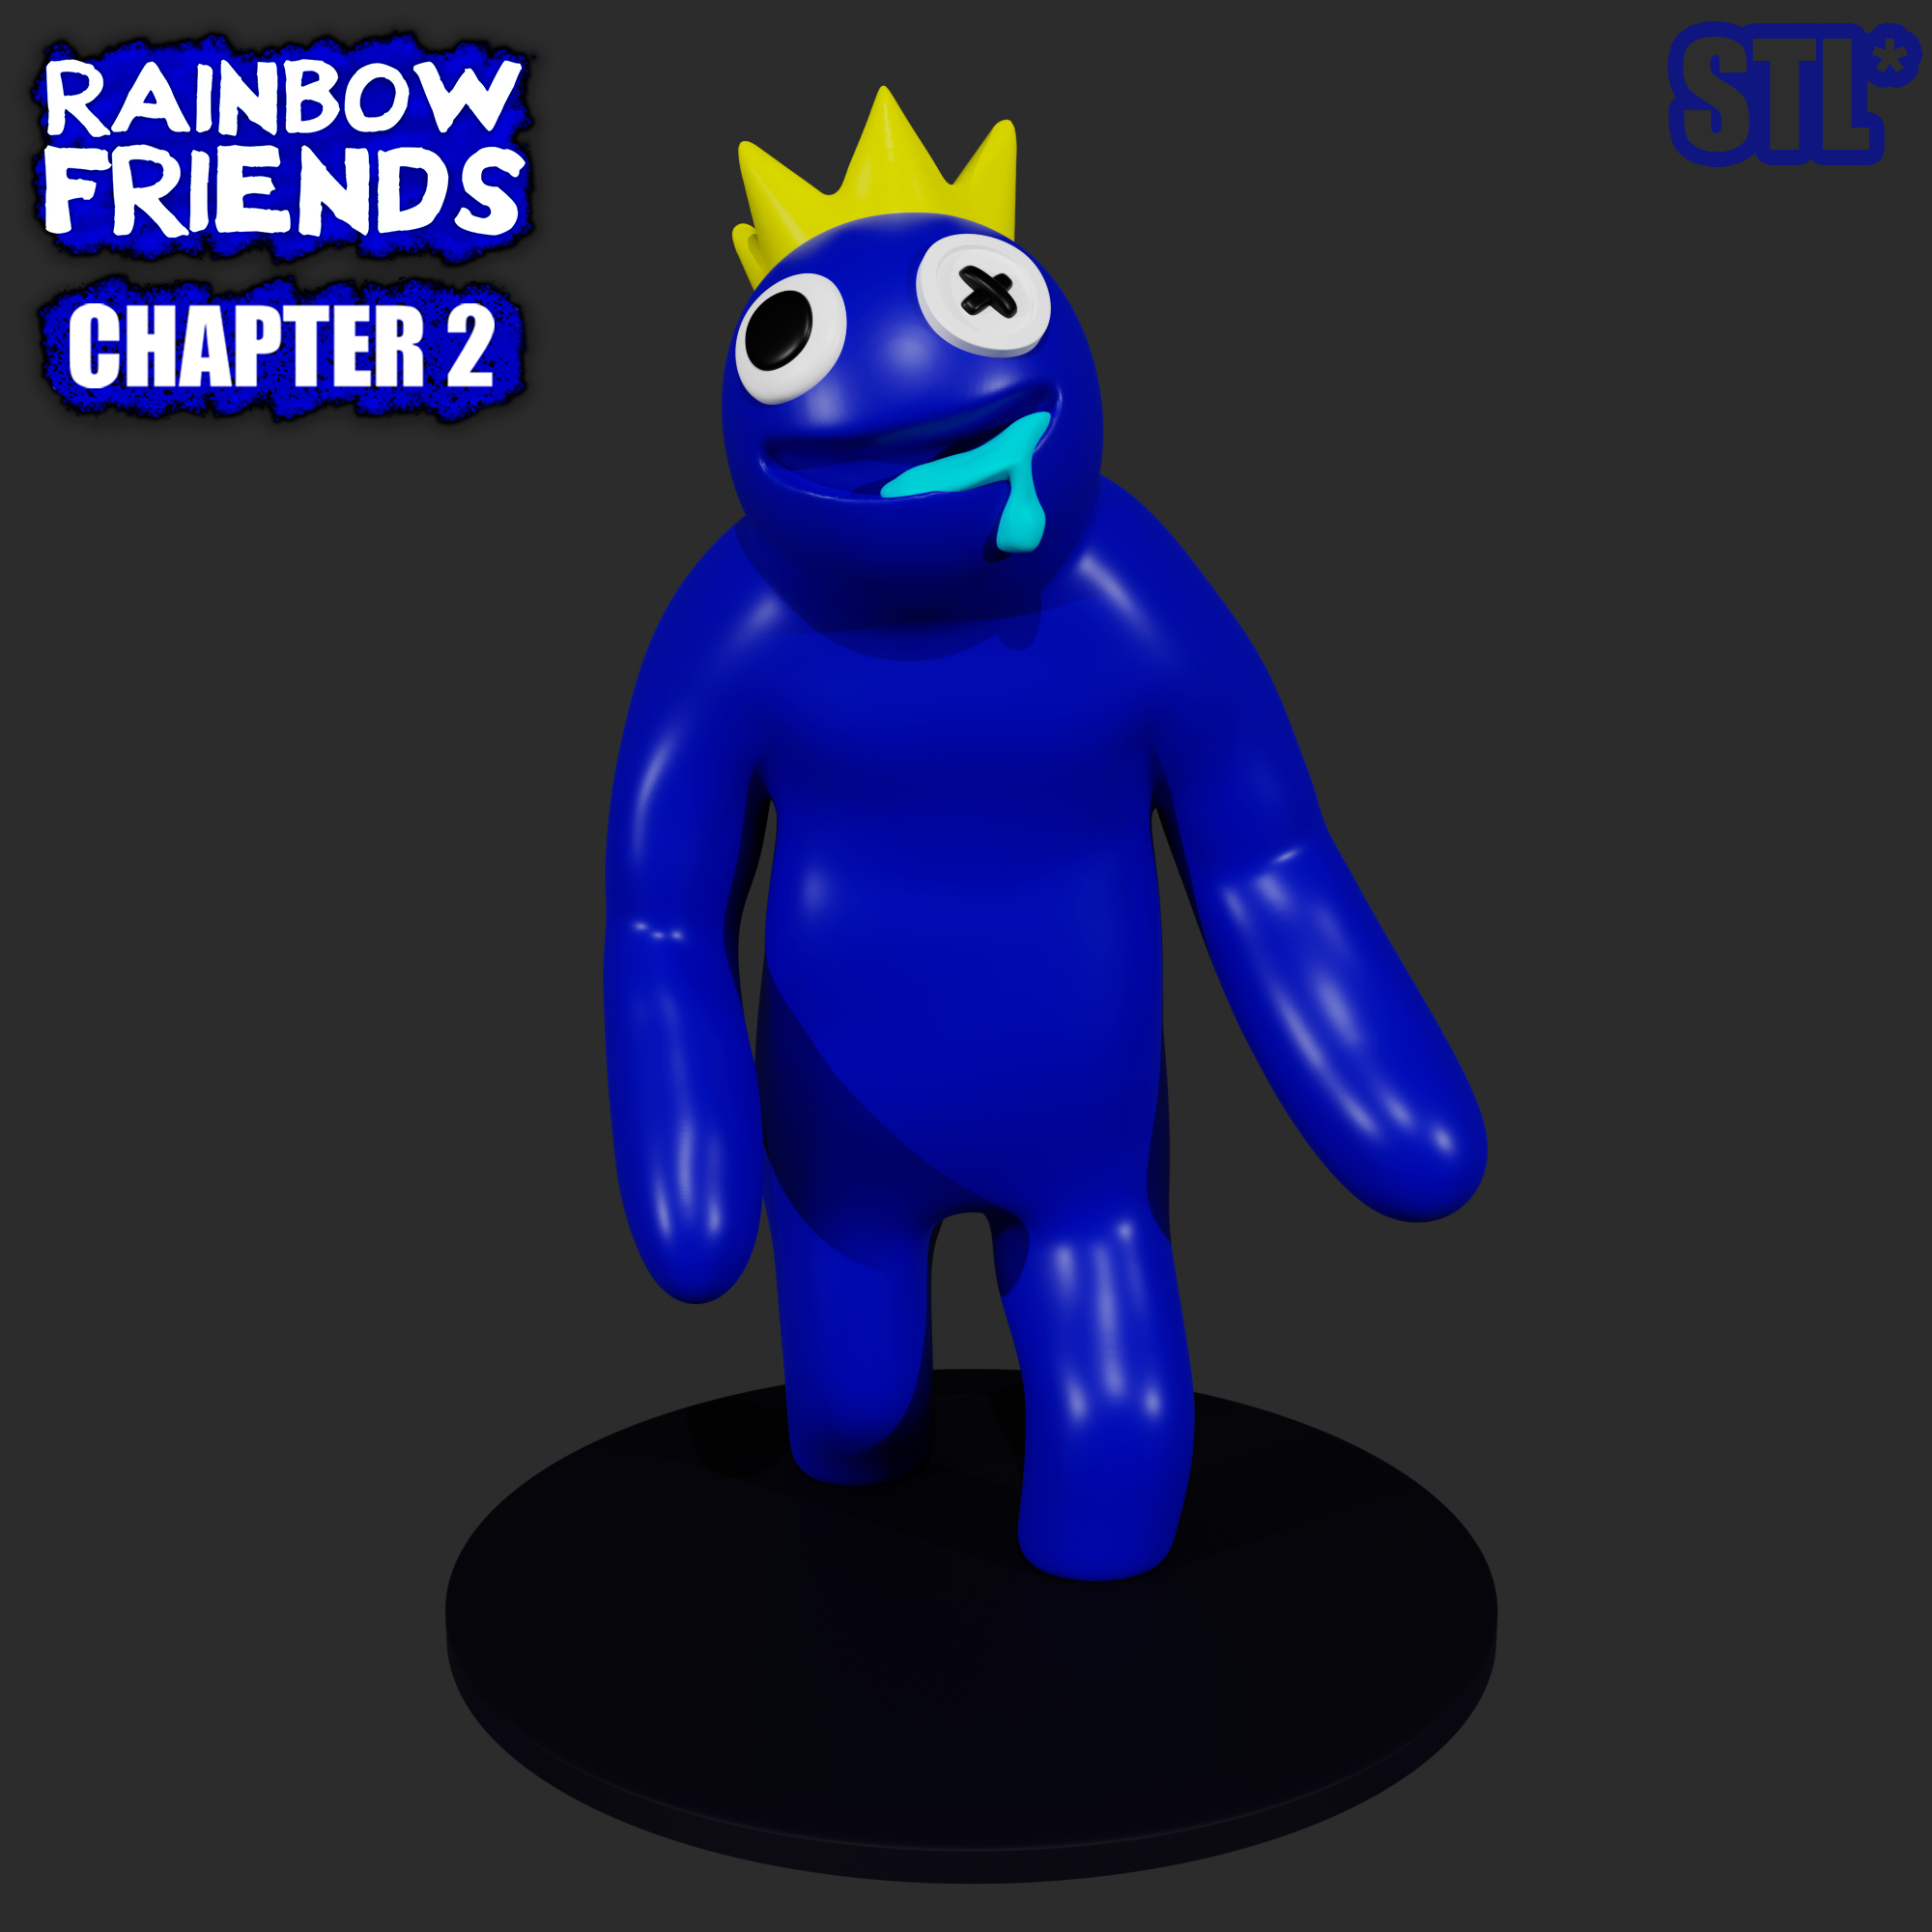 played rainbow friends chapter 2 - Roblox